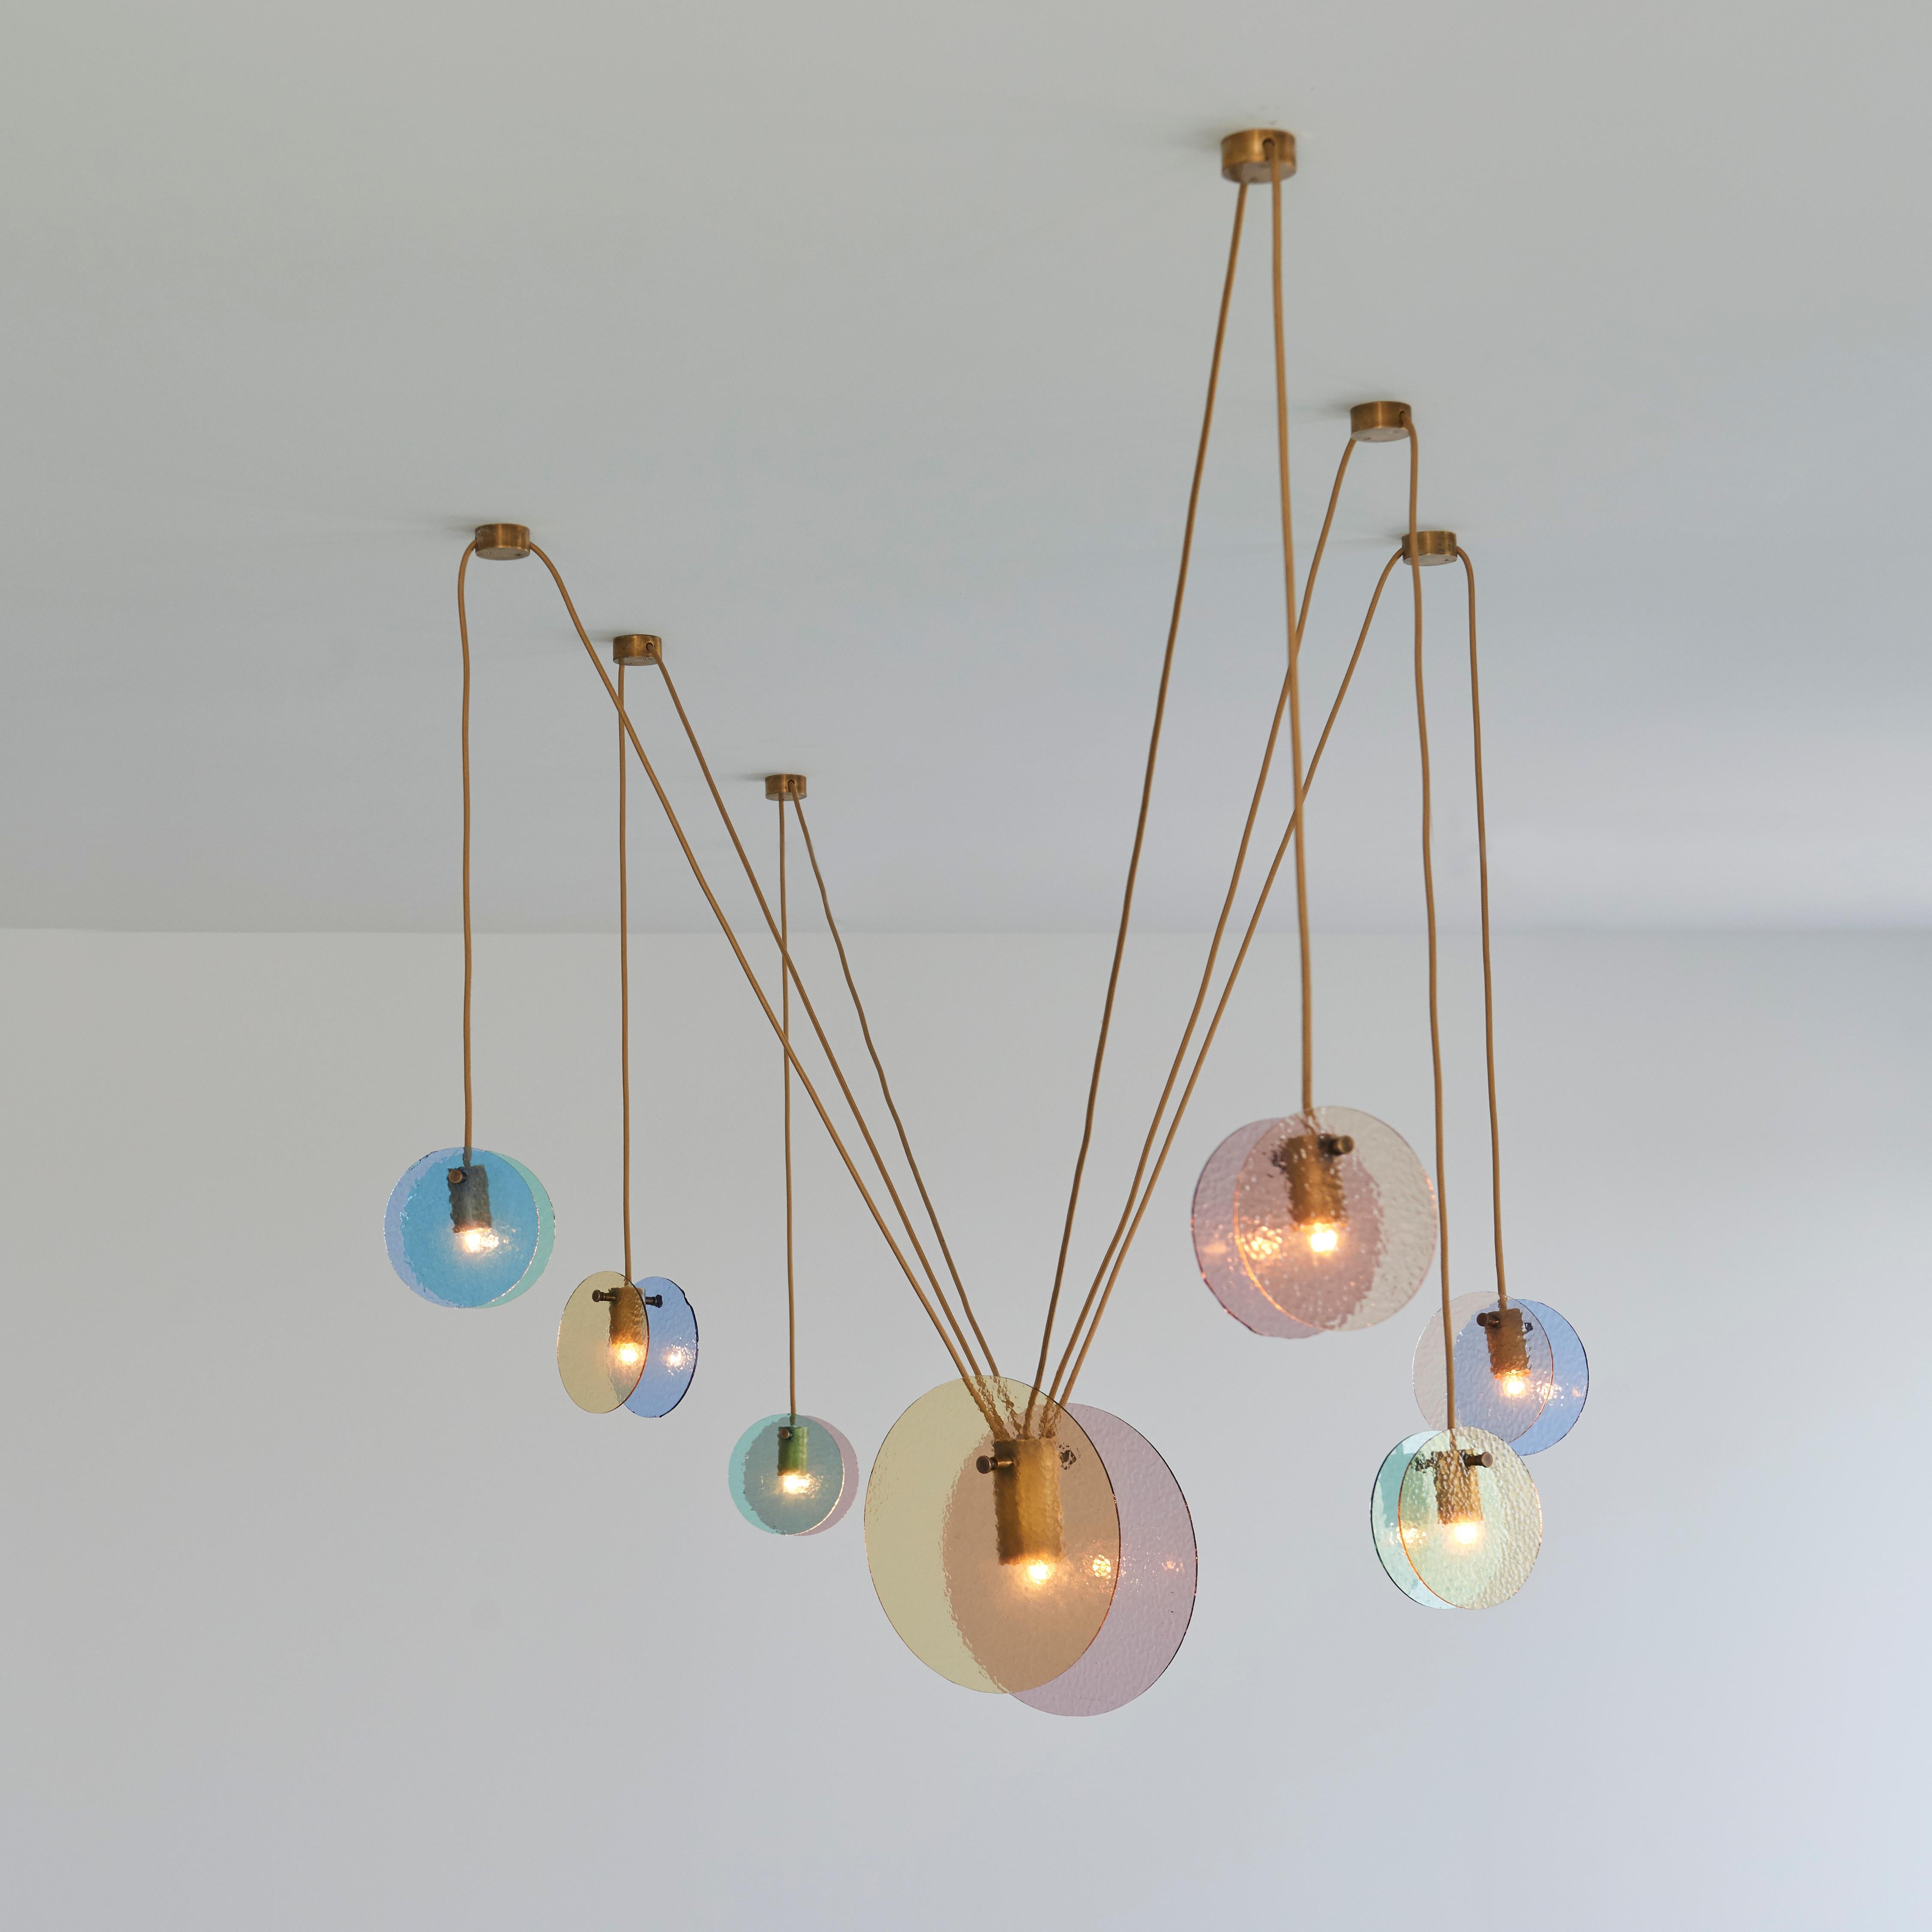 Kalupso 6 satellites ceiling light by Moure Studio
Dimensions: D150 x H80 cm
Materials: Glass and patinated brass
Also available in different dimensions. 

Our Kalupso chandelier is inspired by the Greek nymph of the sea. This name also evokes